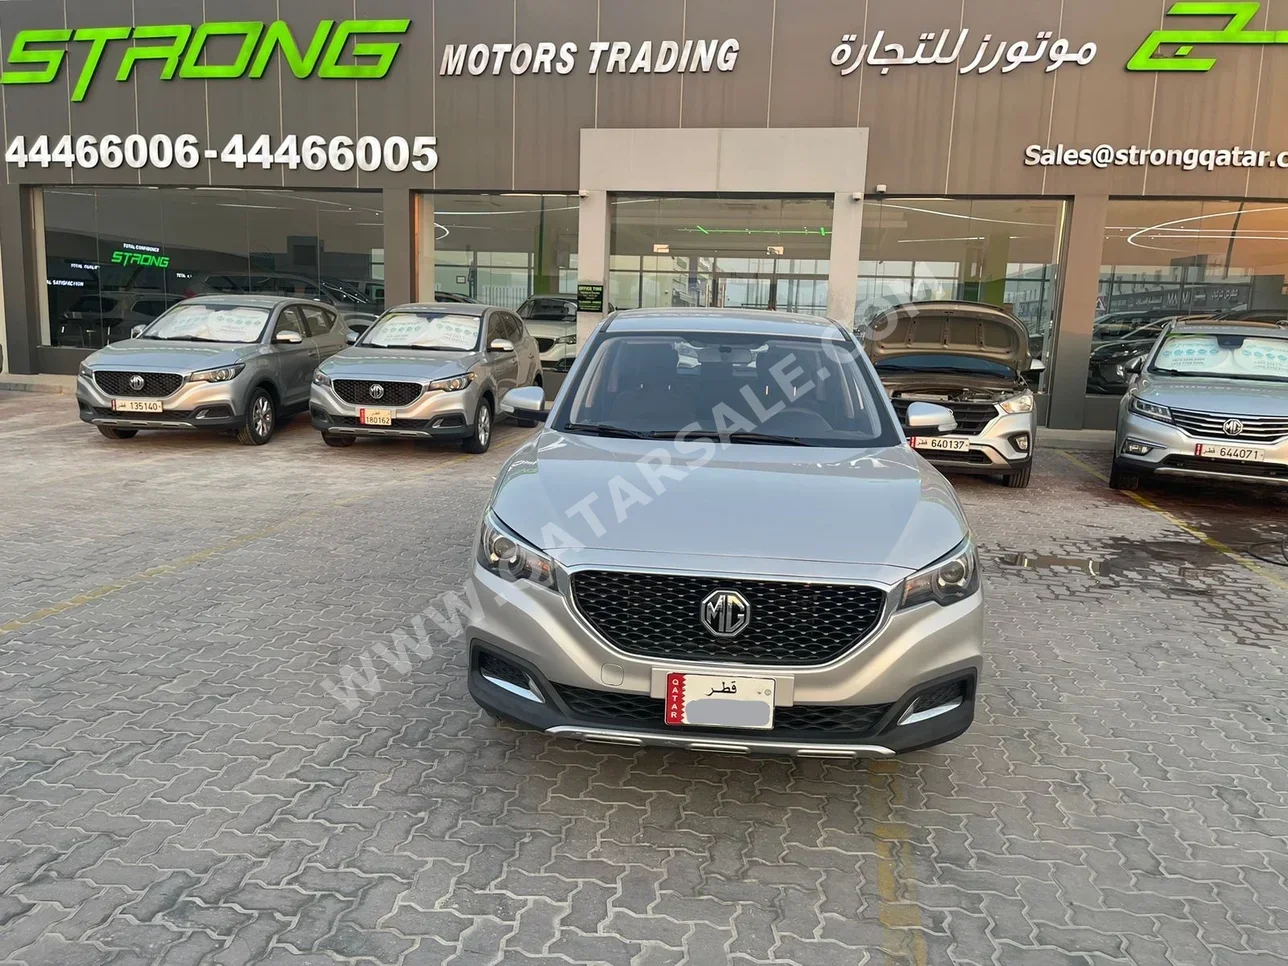 MG  Zs  2020  Automatic  44,000 Km  4 Cylinder  Front Wheel Drive (FWD)  SUV  Silver  With Warranty